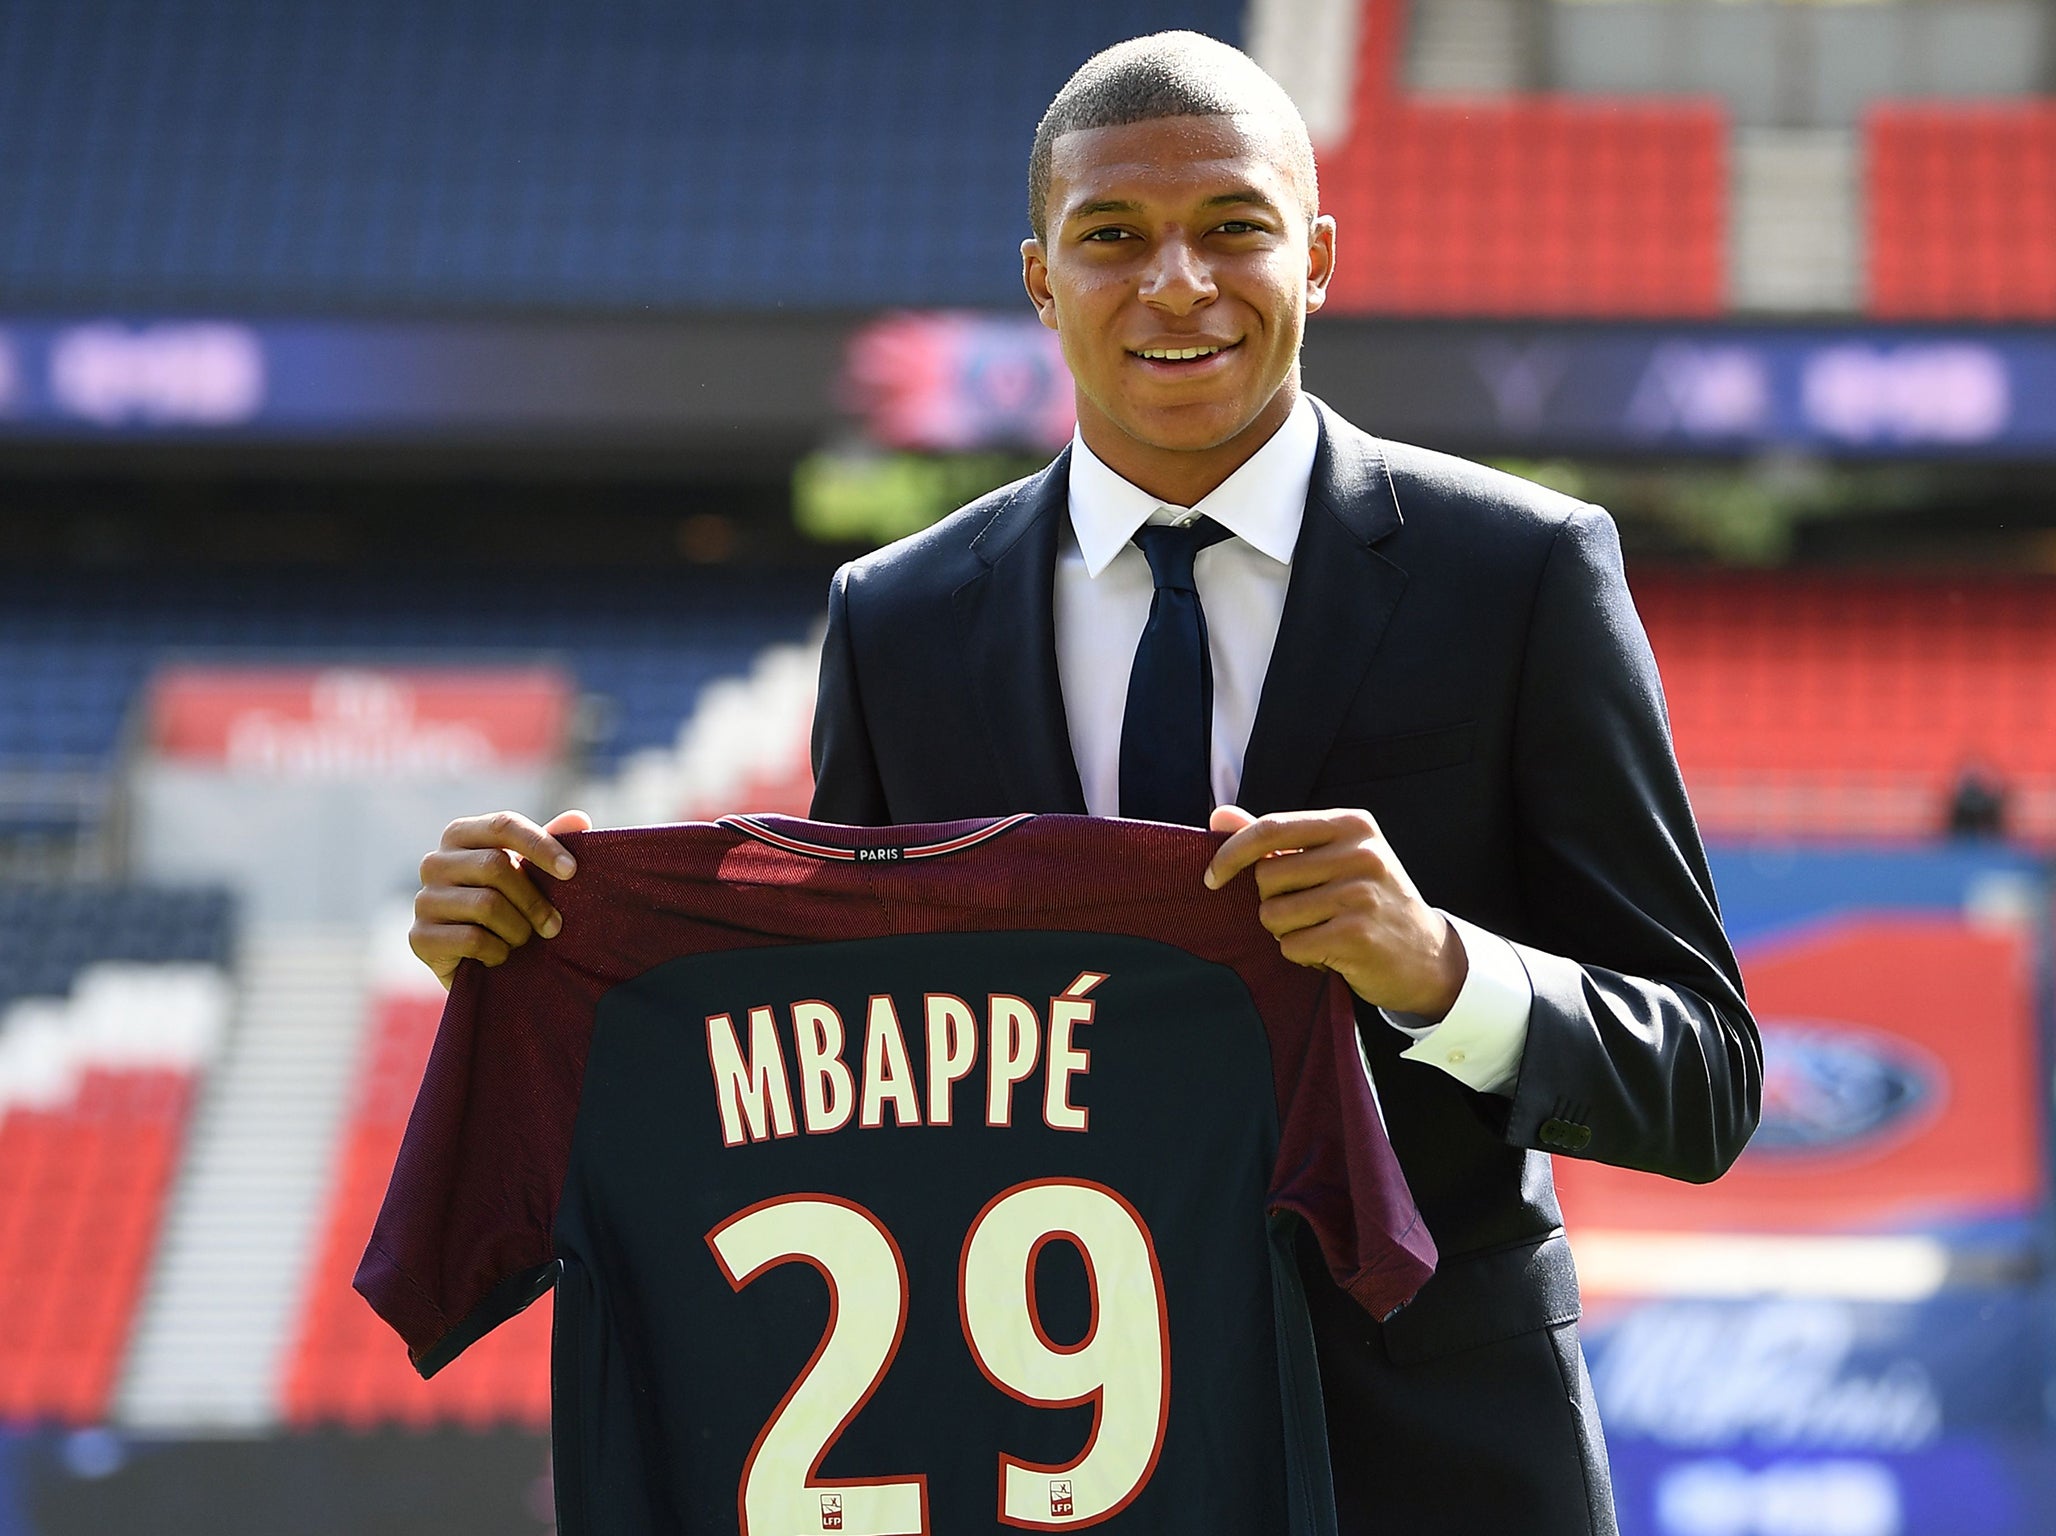 Mbappe has joined PSG from Monaco for £166m